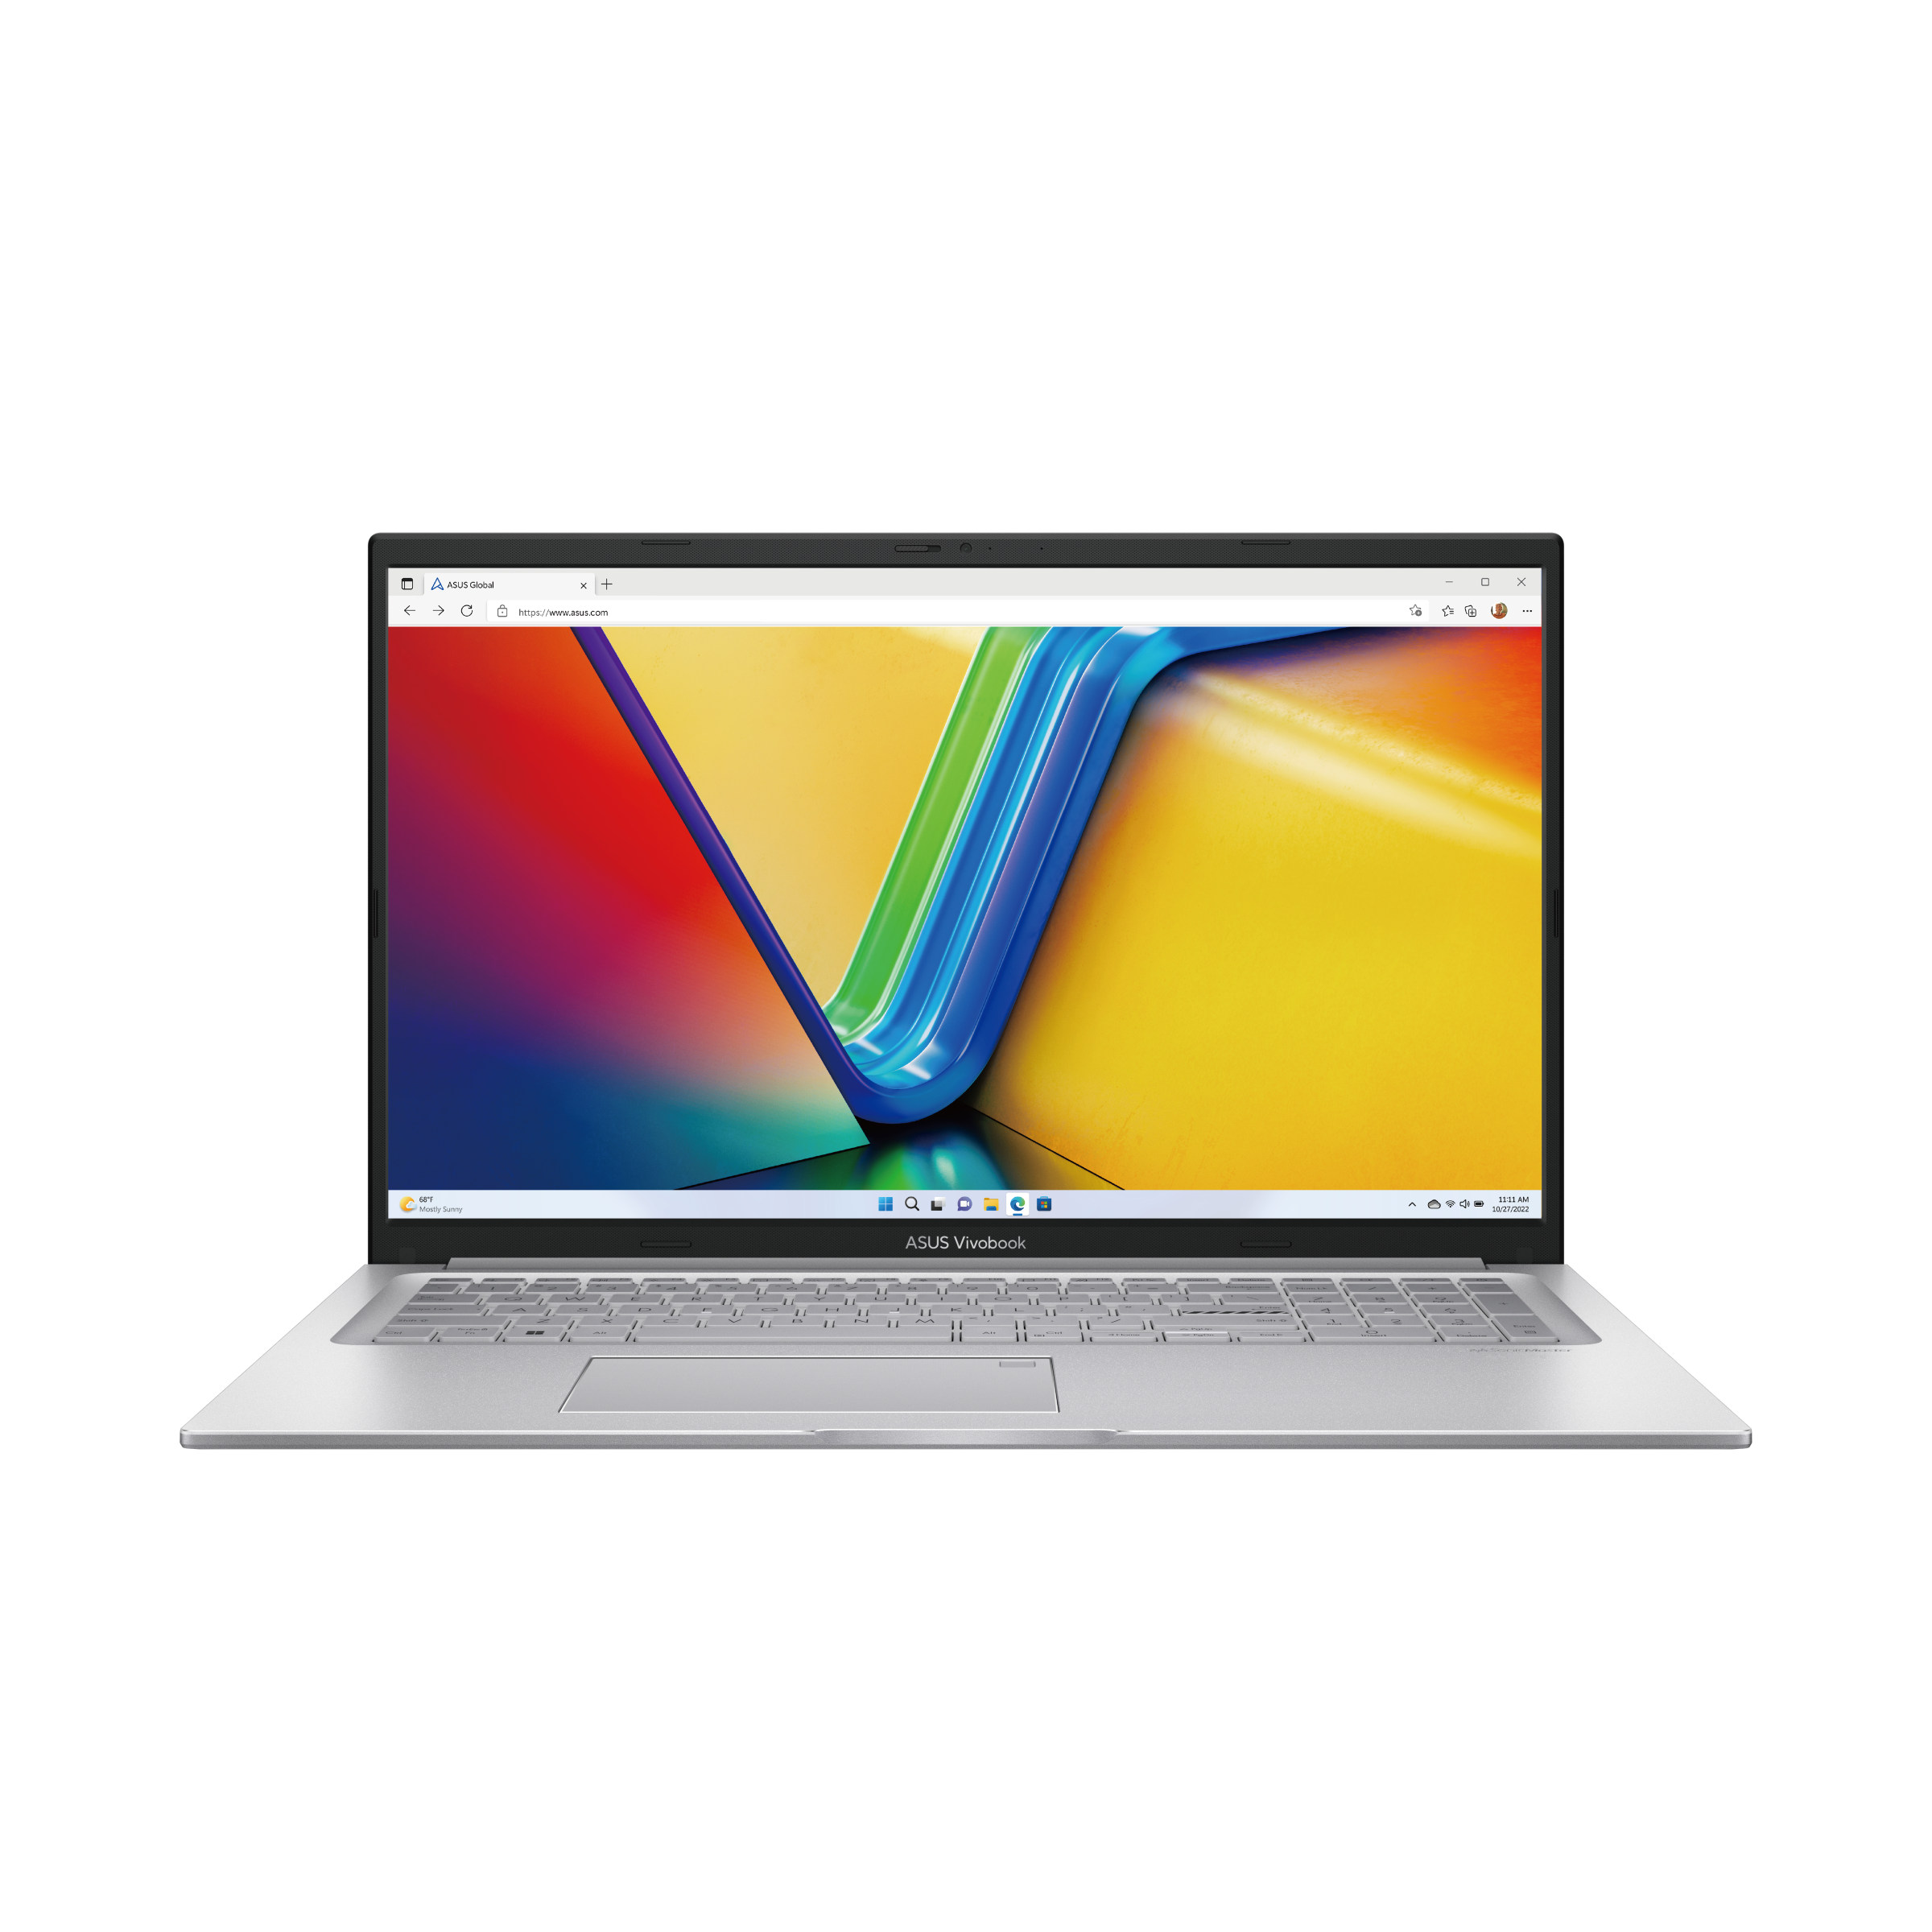 ASUS Vivobook 17 (F1704)｜Laptops For Home｜ASUS USA